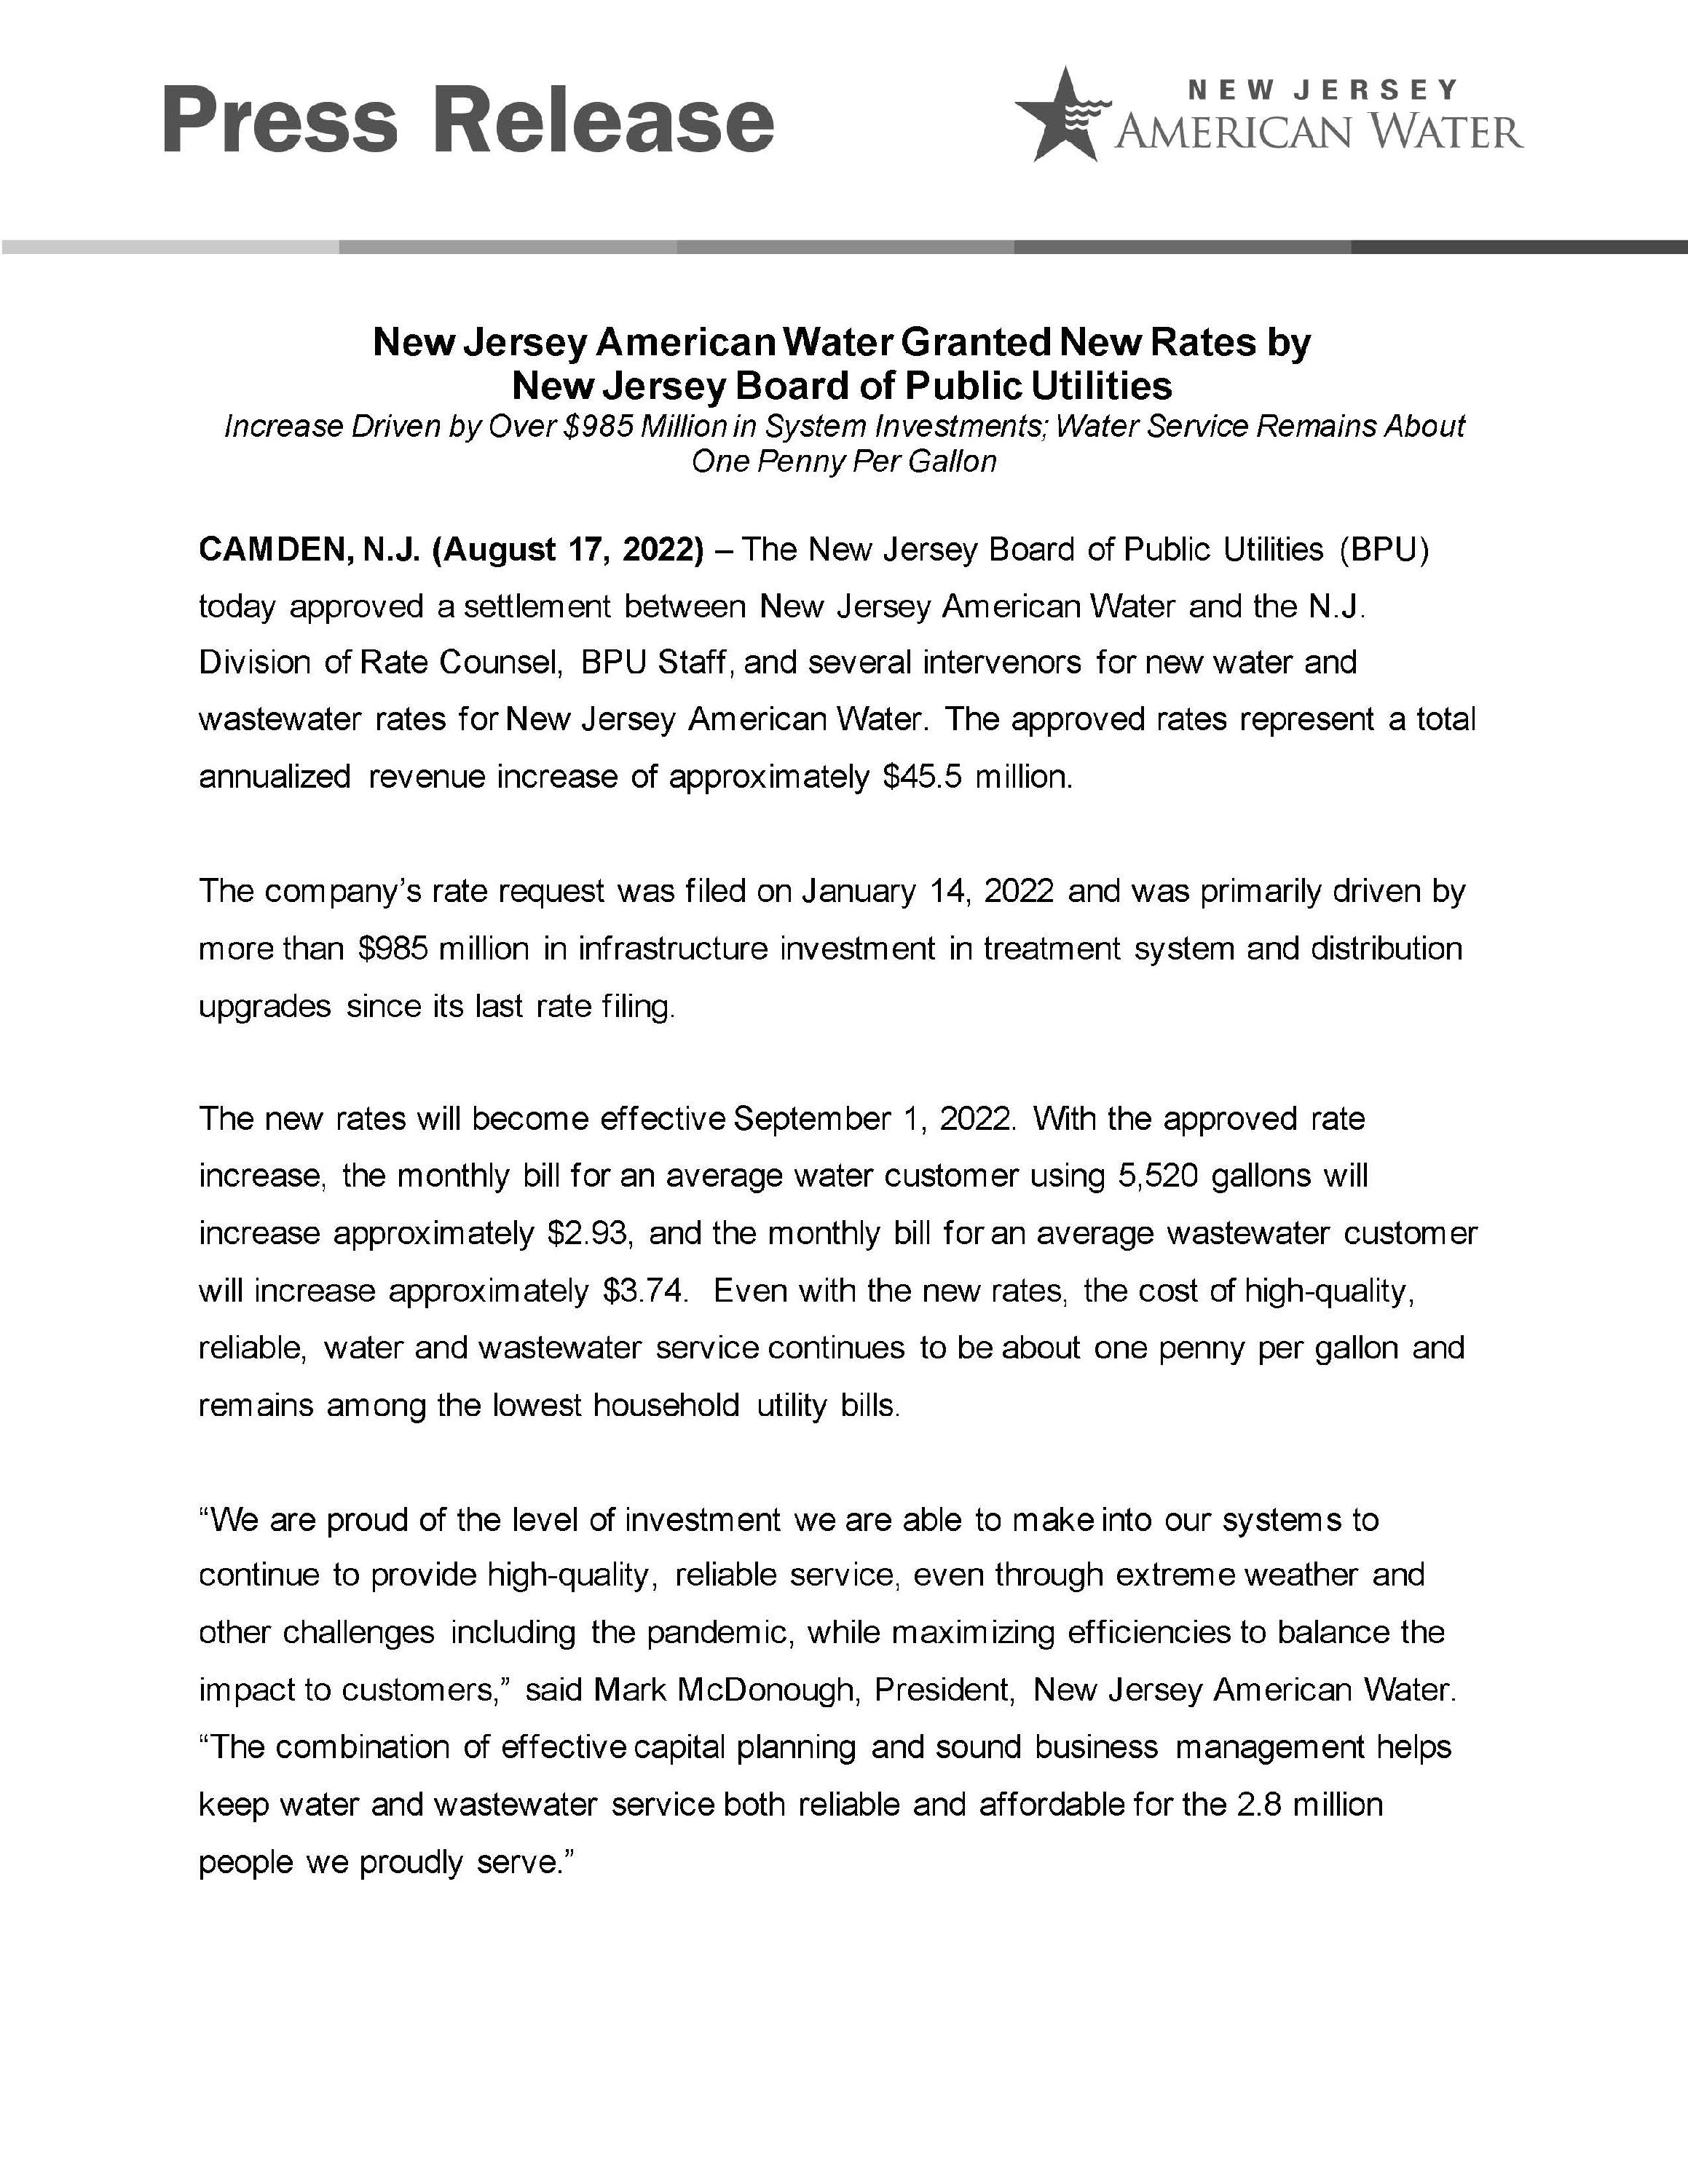 New Jersey American Water Granted New Rates_Final_8.17.22_Page_1